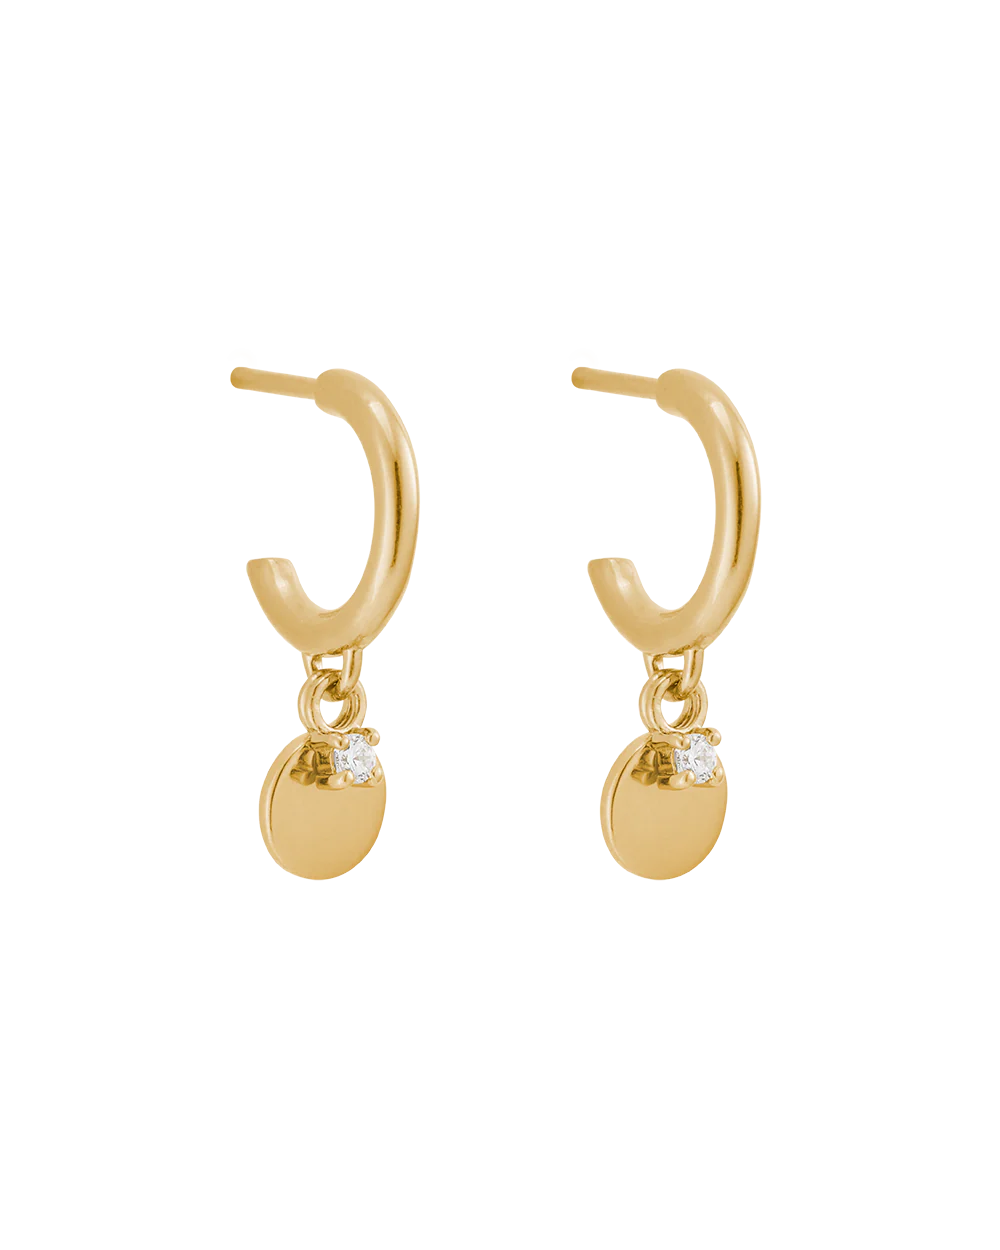 Kirstin Ash Gold Honour Hoops- 18k Gold Plated